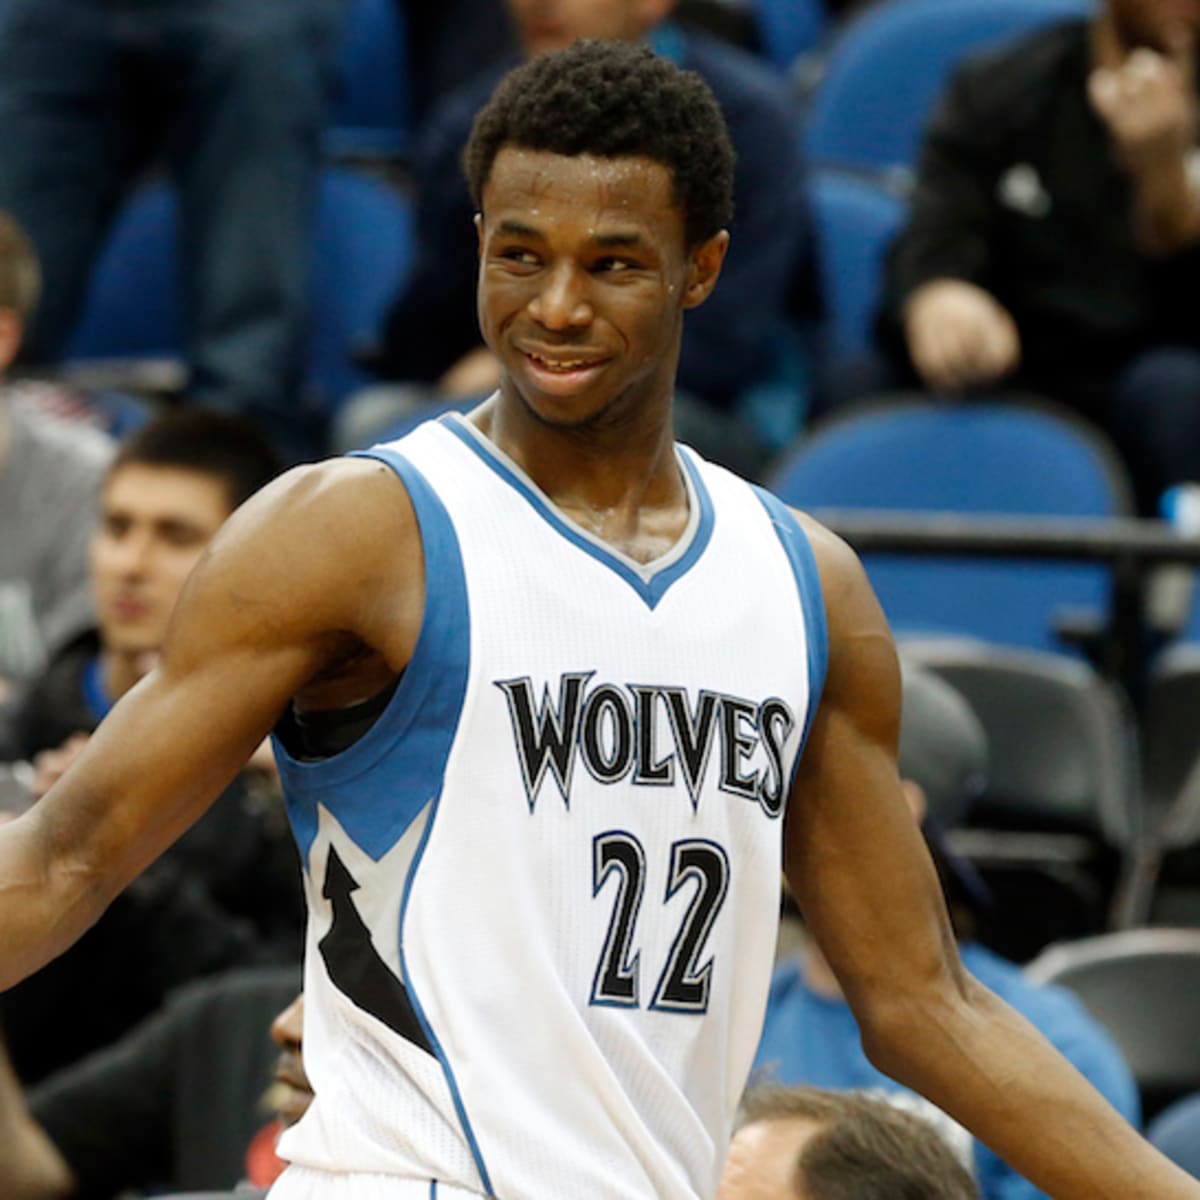 Andrew Wiggins named 2014-15 NBA Rookie of the Year